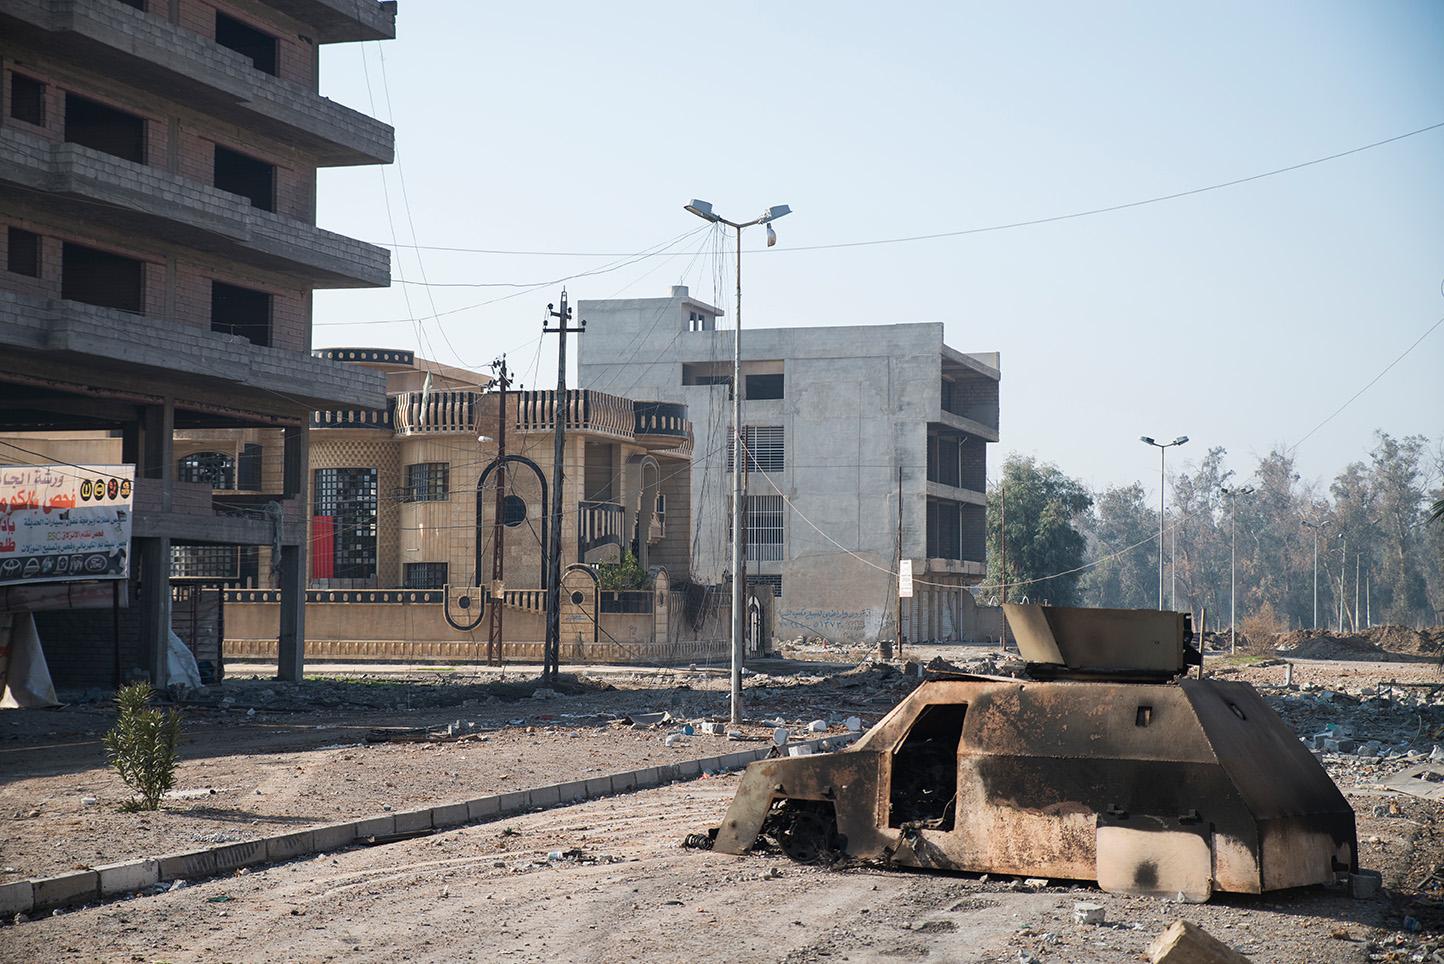 The Impact of ISIS in Iraq